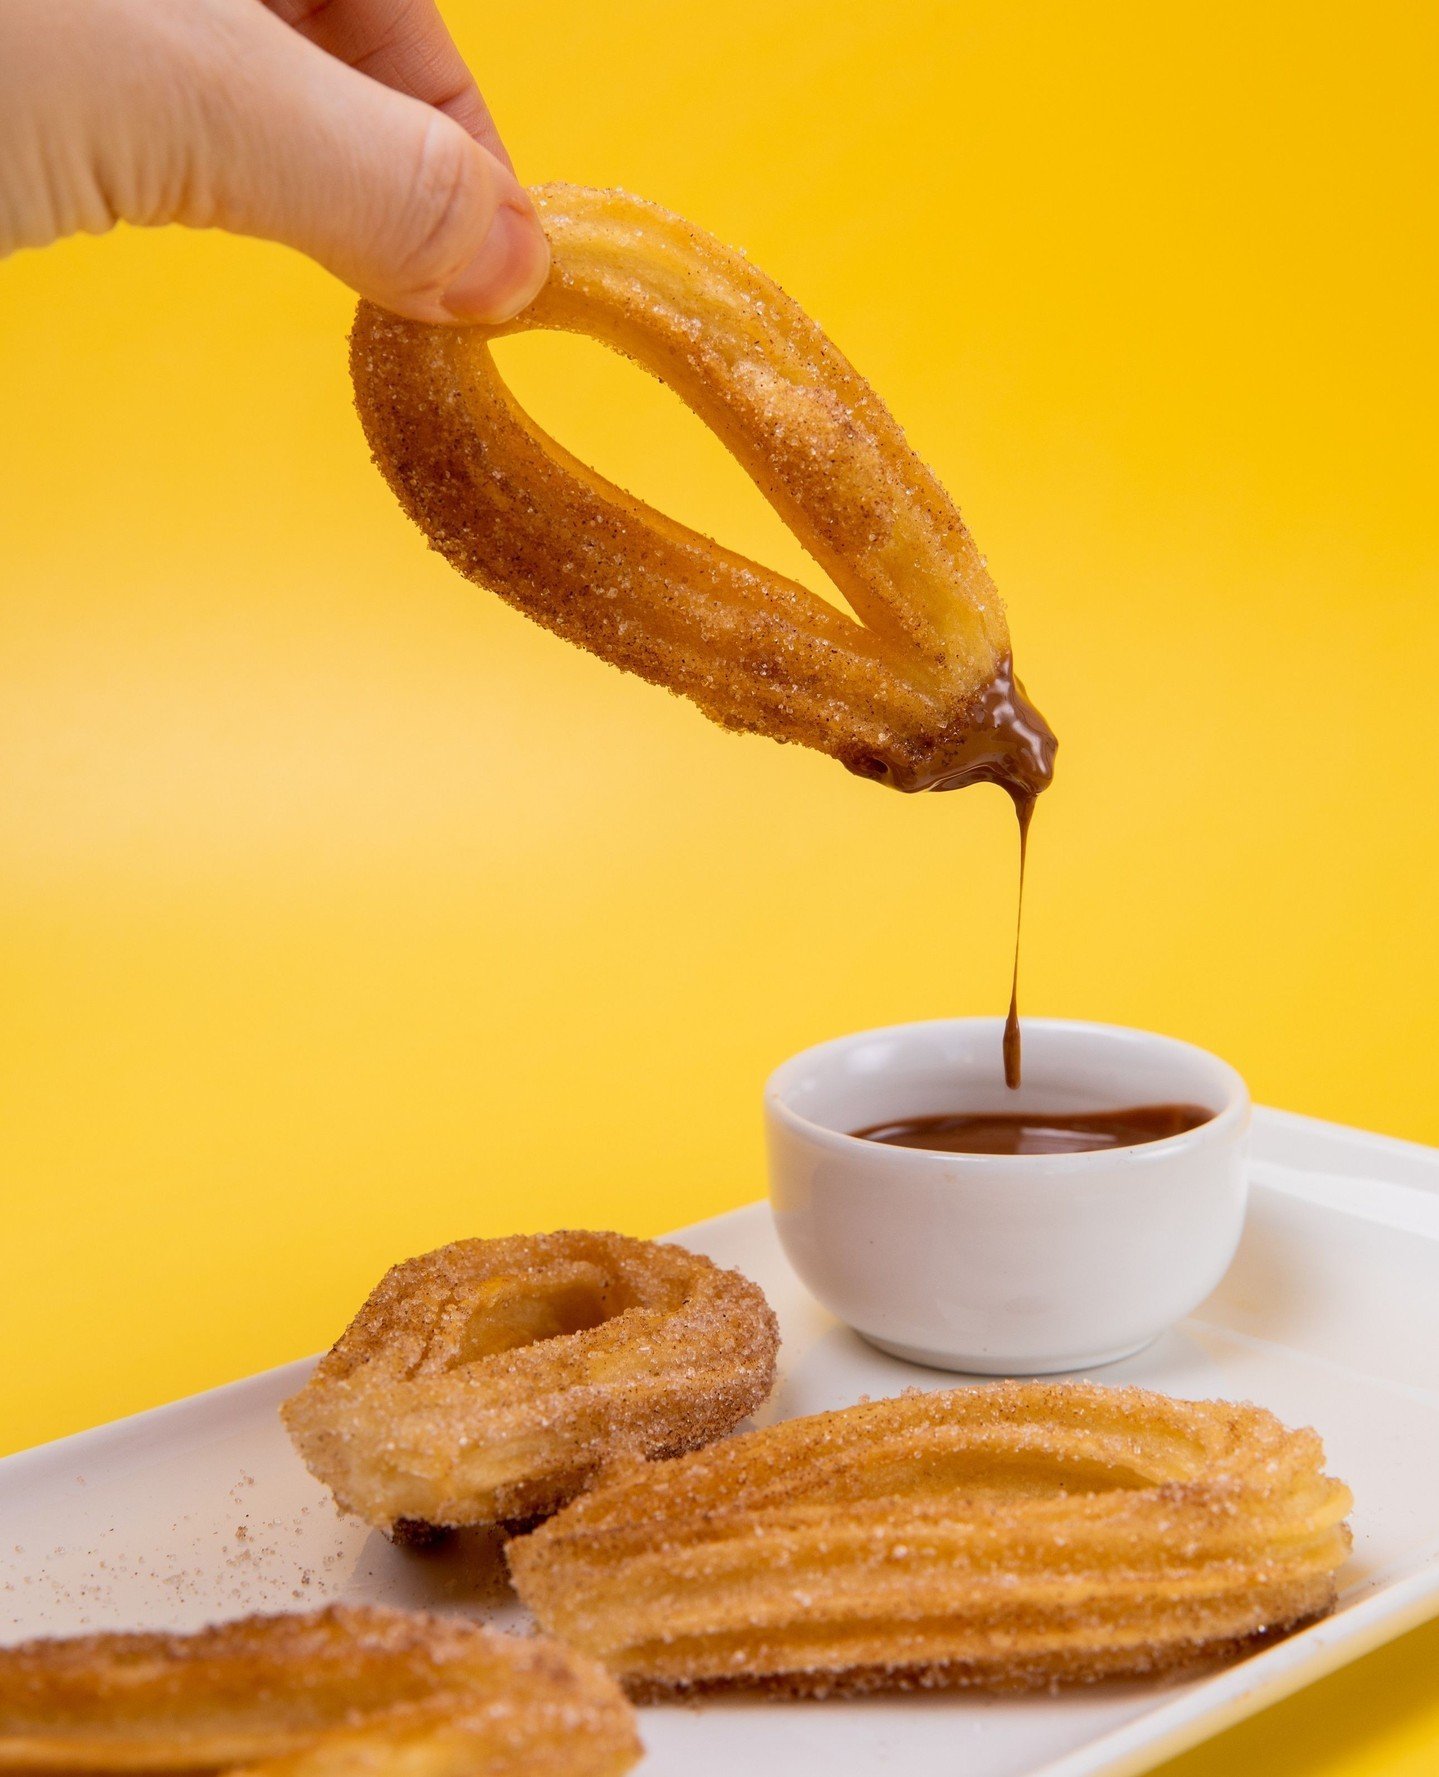 Crispy, cinnamon goodness! Churros at Chocoberry are the ultimate comfort snack!⁠
.⁠
.⁠
.⁠
#chocoberry #cafe #dessert #desserts #sweettooth #sweet #foodie #foodies #leicesterfoodie #derbyfoodie #loughbroughfoodie #nottinghamfoodie #cardifffoodie #bir